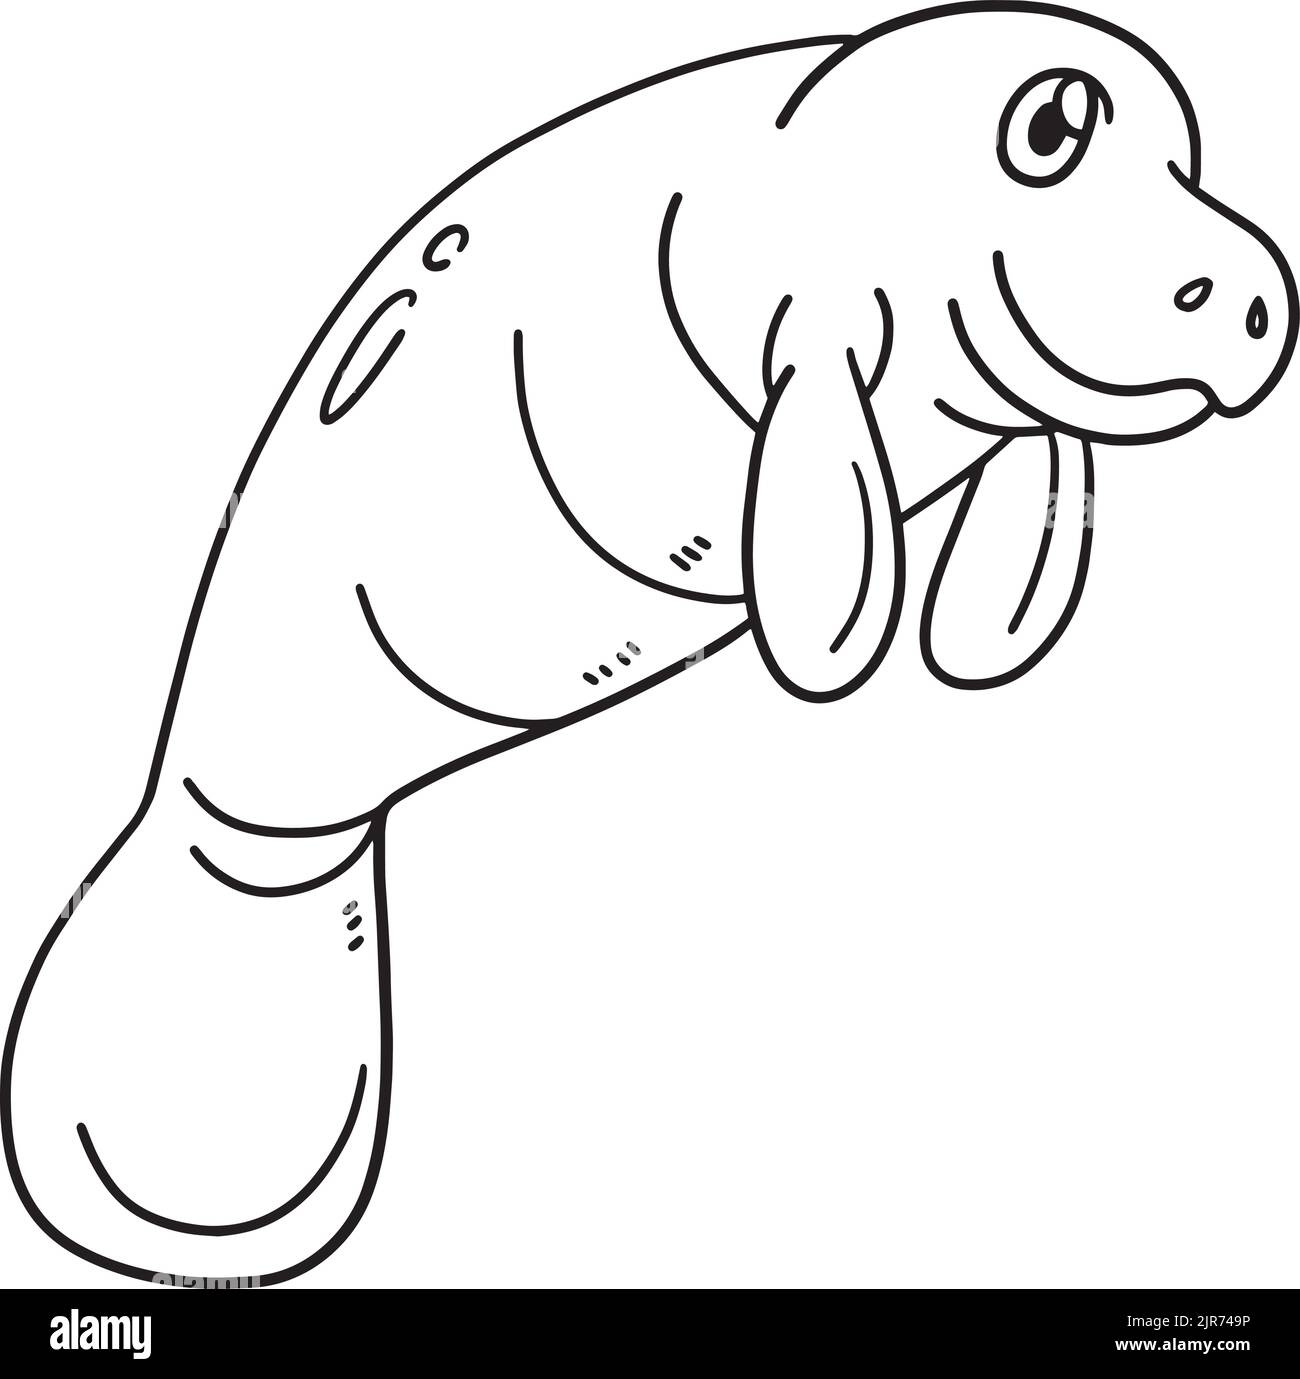 Manatee Isolated Coloring Page for Kids Stock Vector